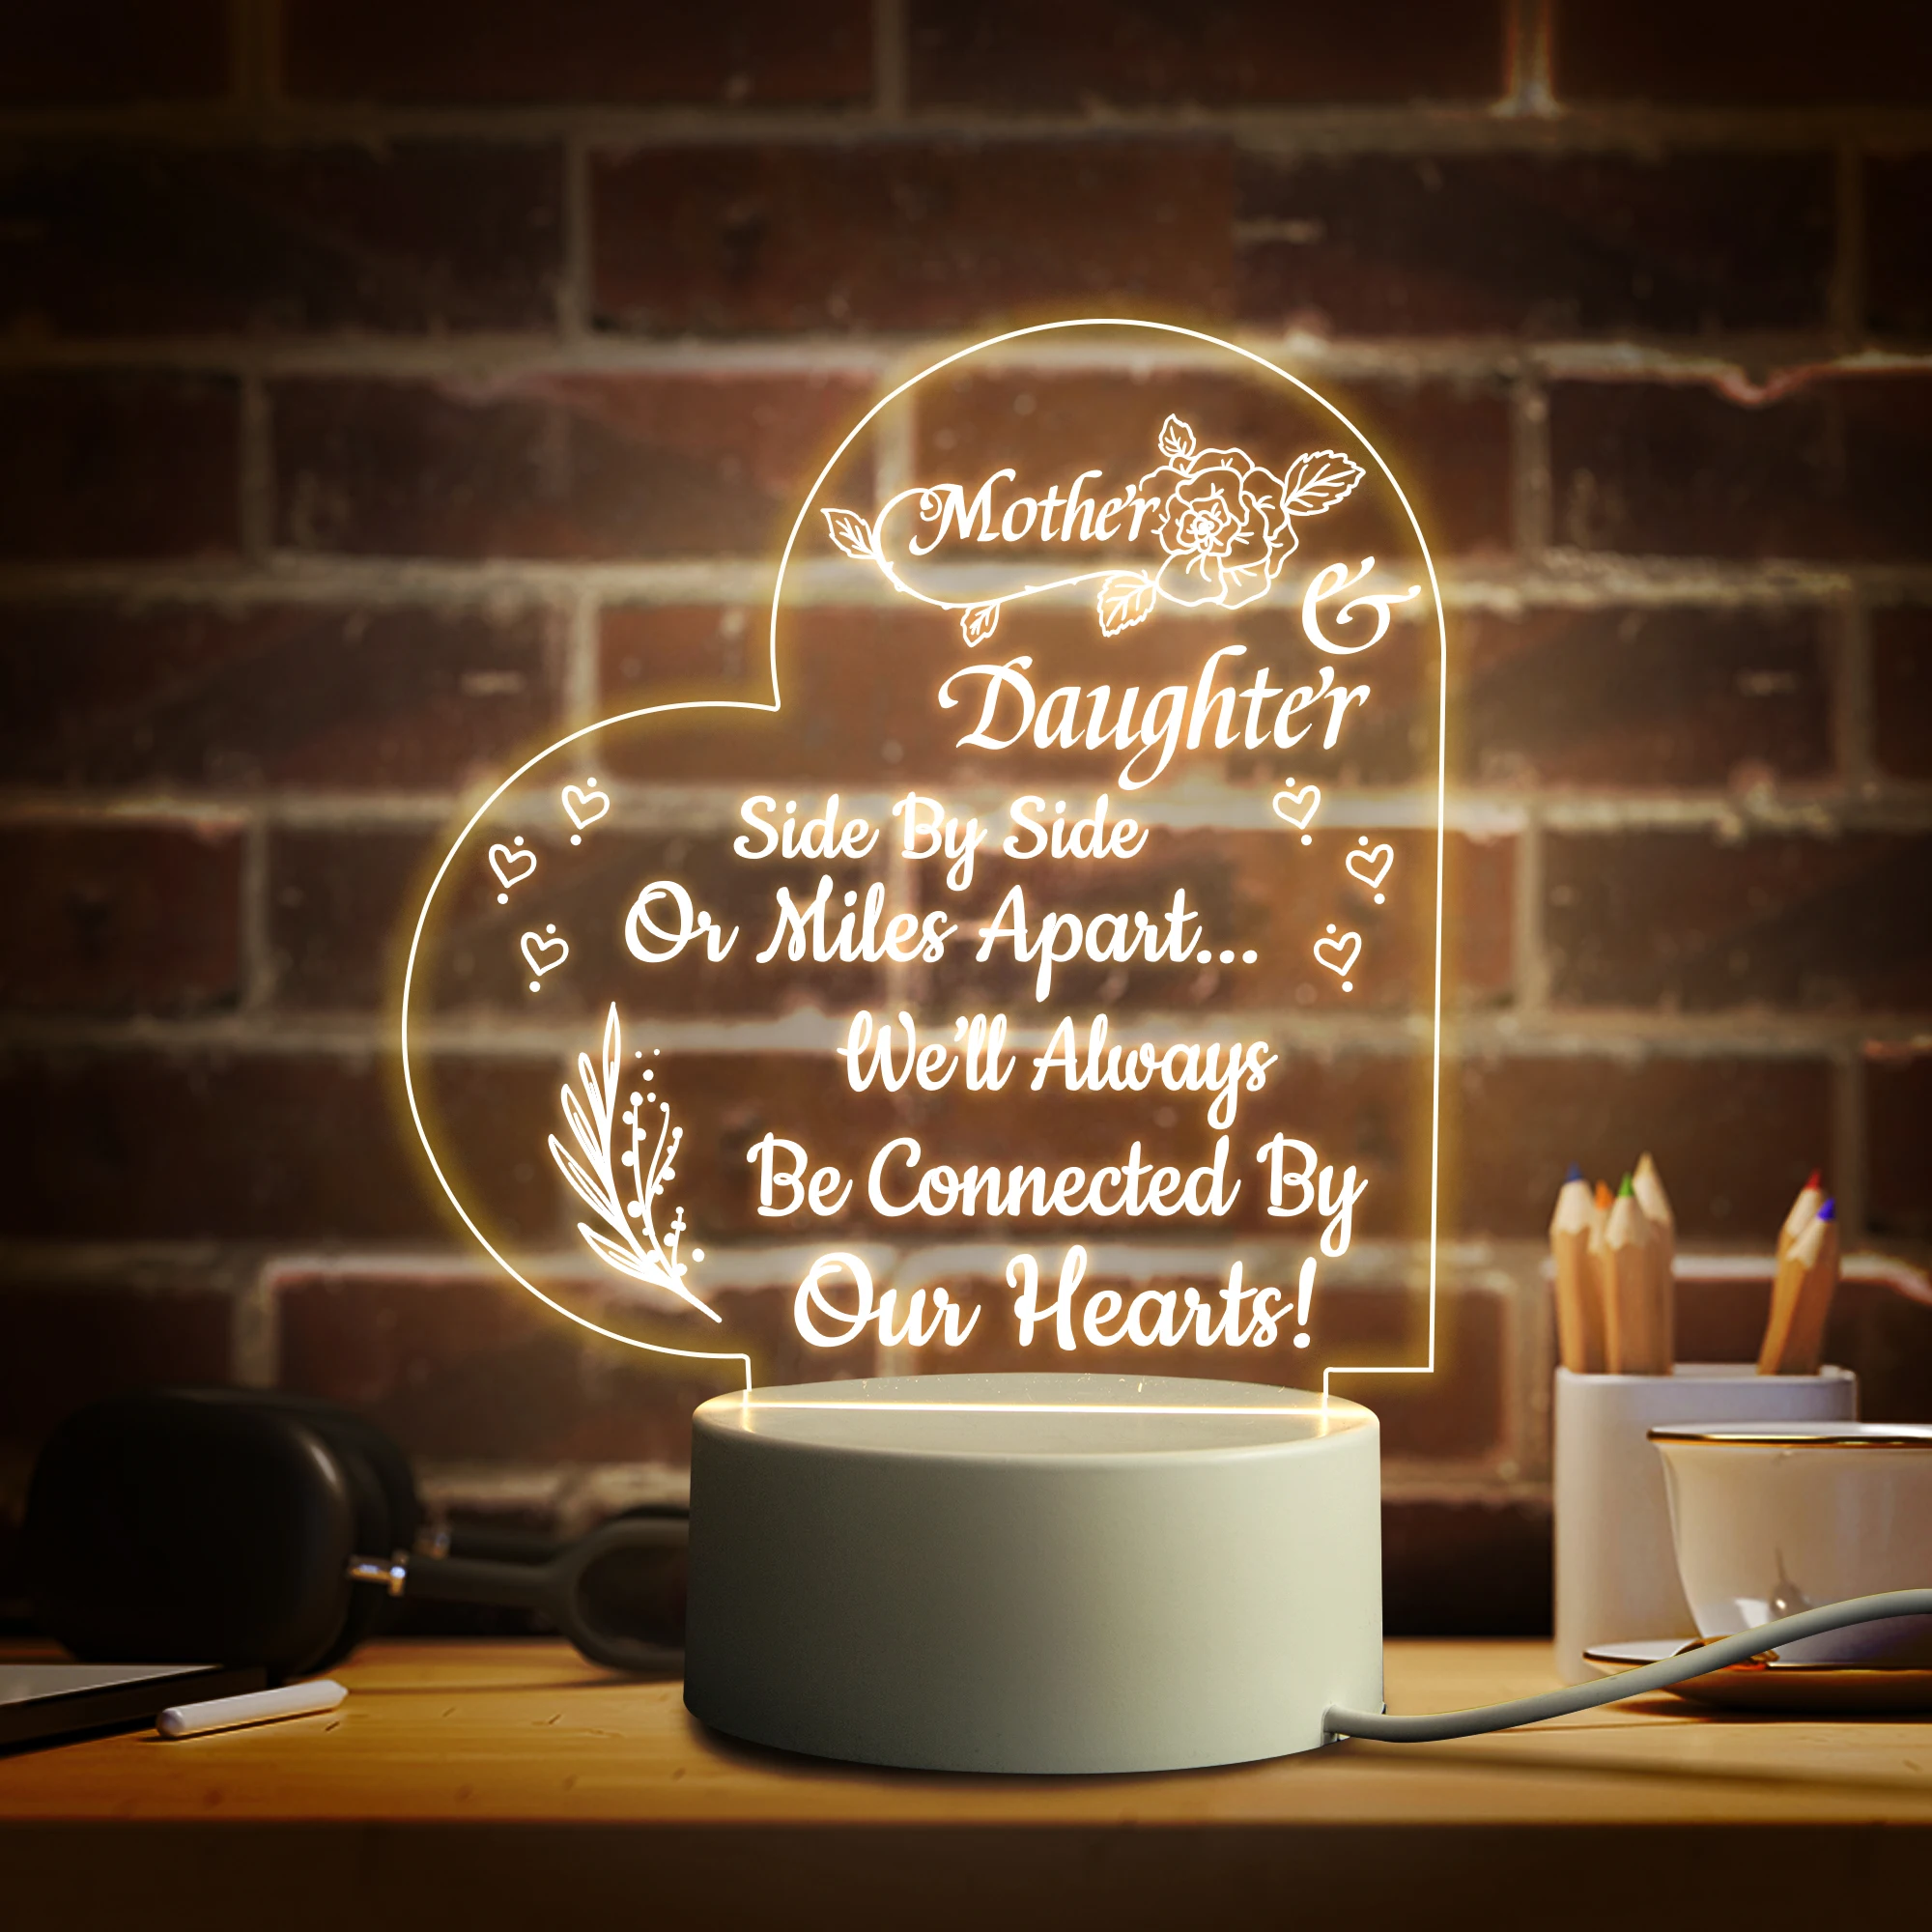 potato night light Night Light Unique Gift to Daddy Mommy Led Nightlight for Bedroom Birthday Gifts to Father Mother Table Lamp Decor for Room portable night light